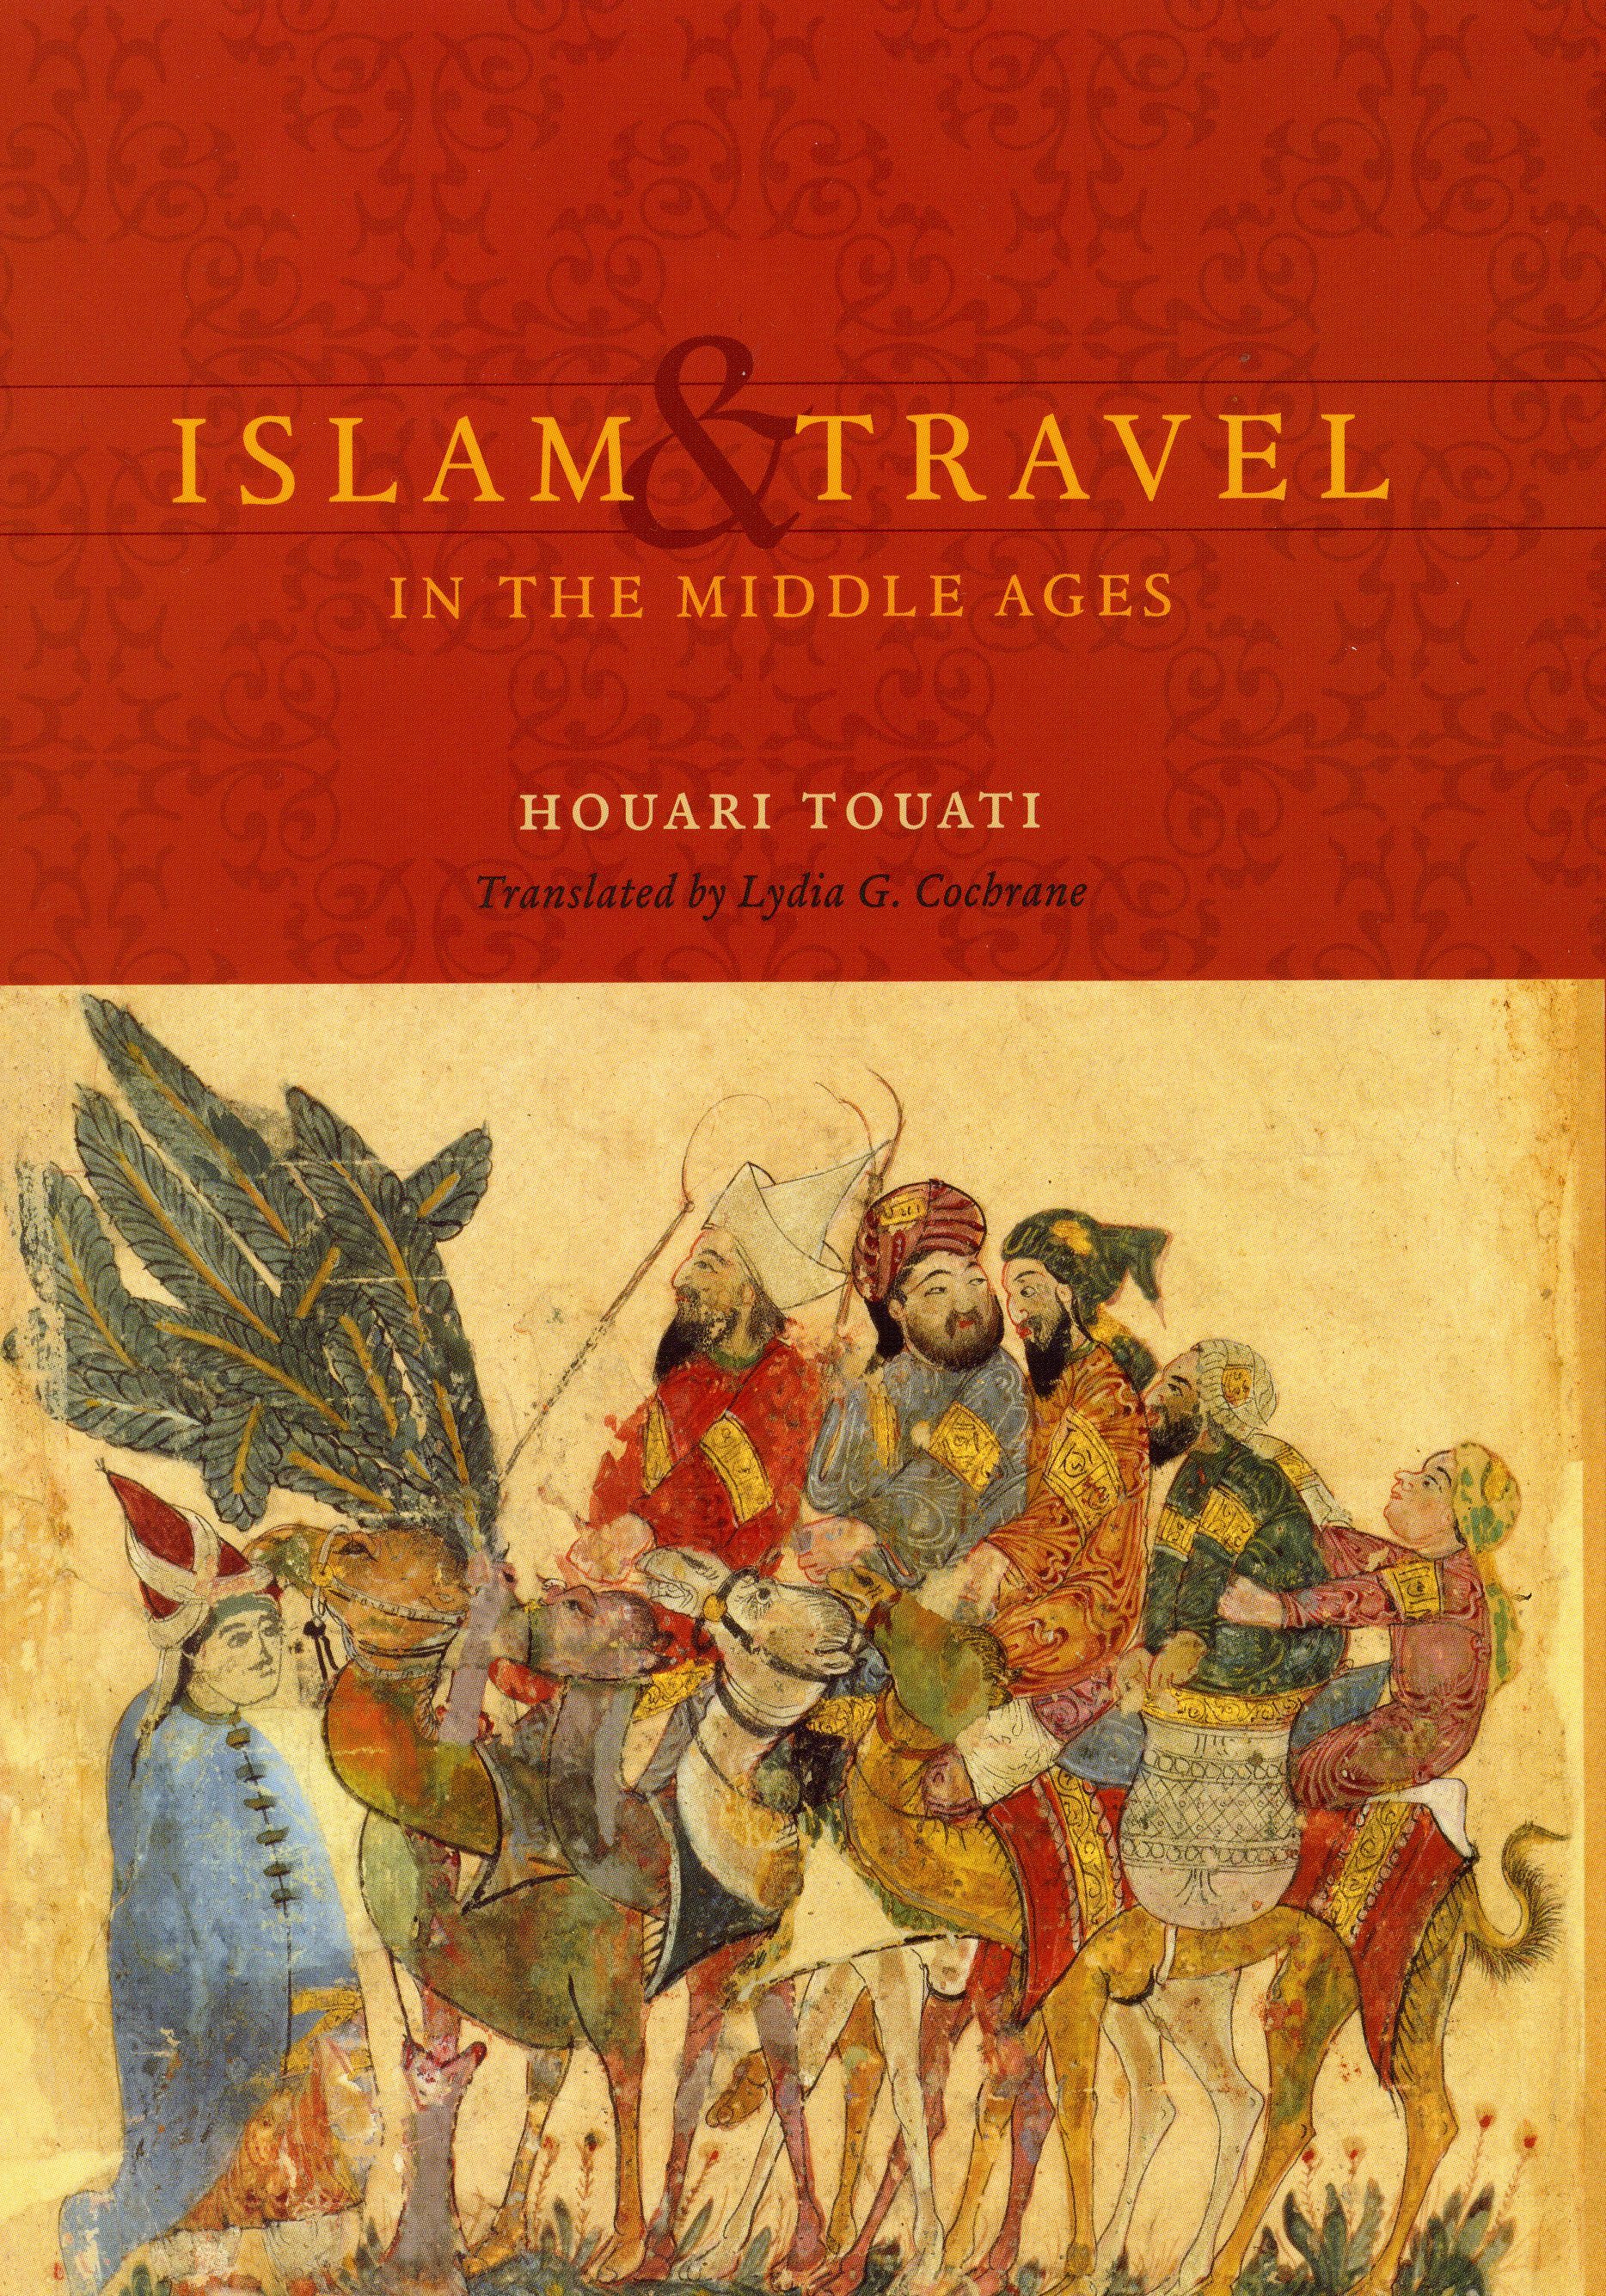 Islam and Travel in the Middle Ages Houari Touati and Lydia G. Cochrane